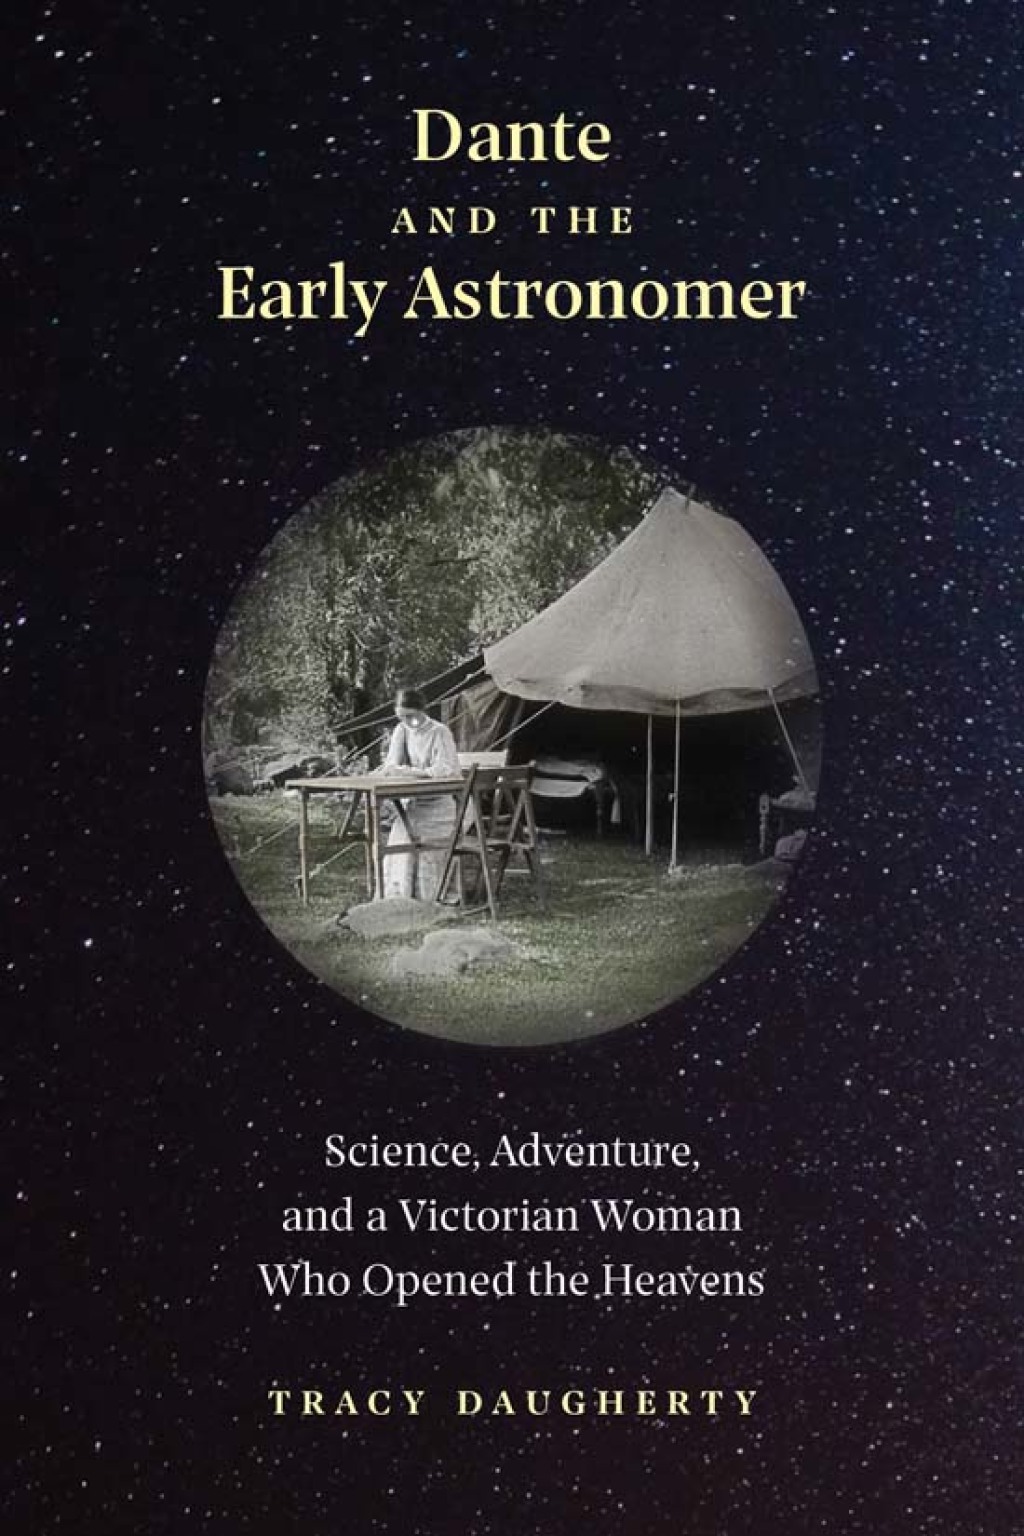 Dante and the Early Astronomer (eBook) - Tracy Daugherty